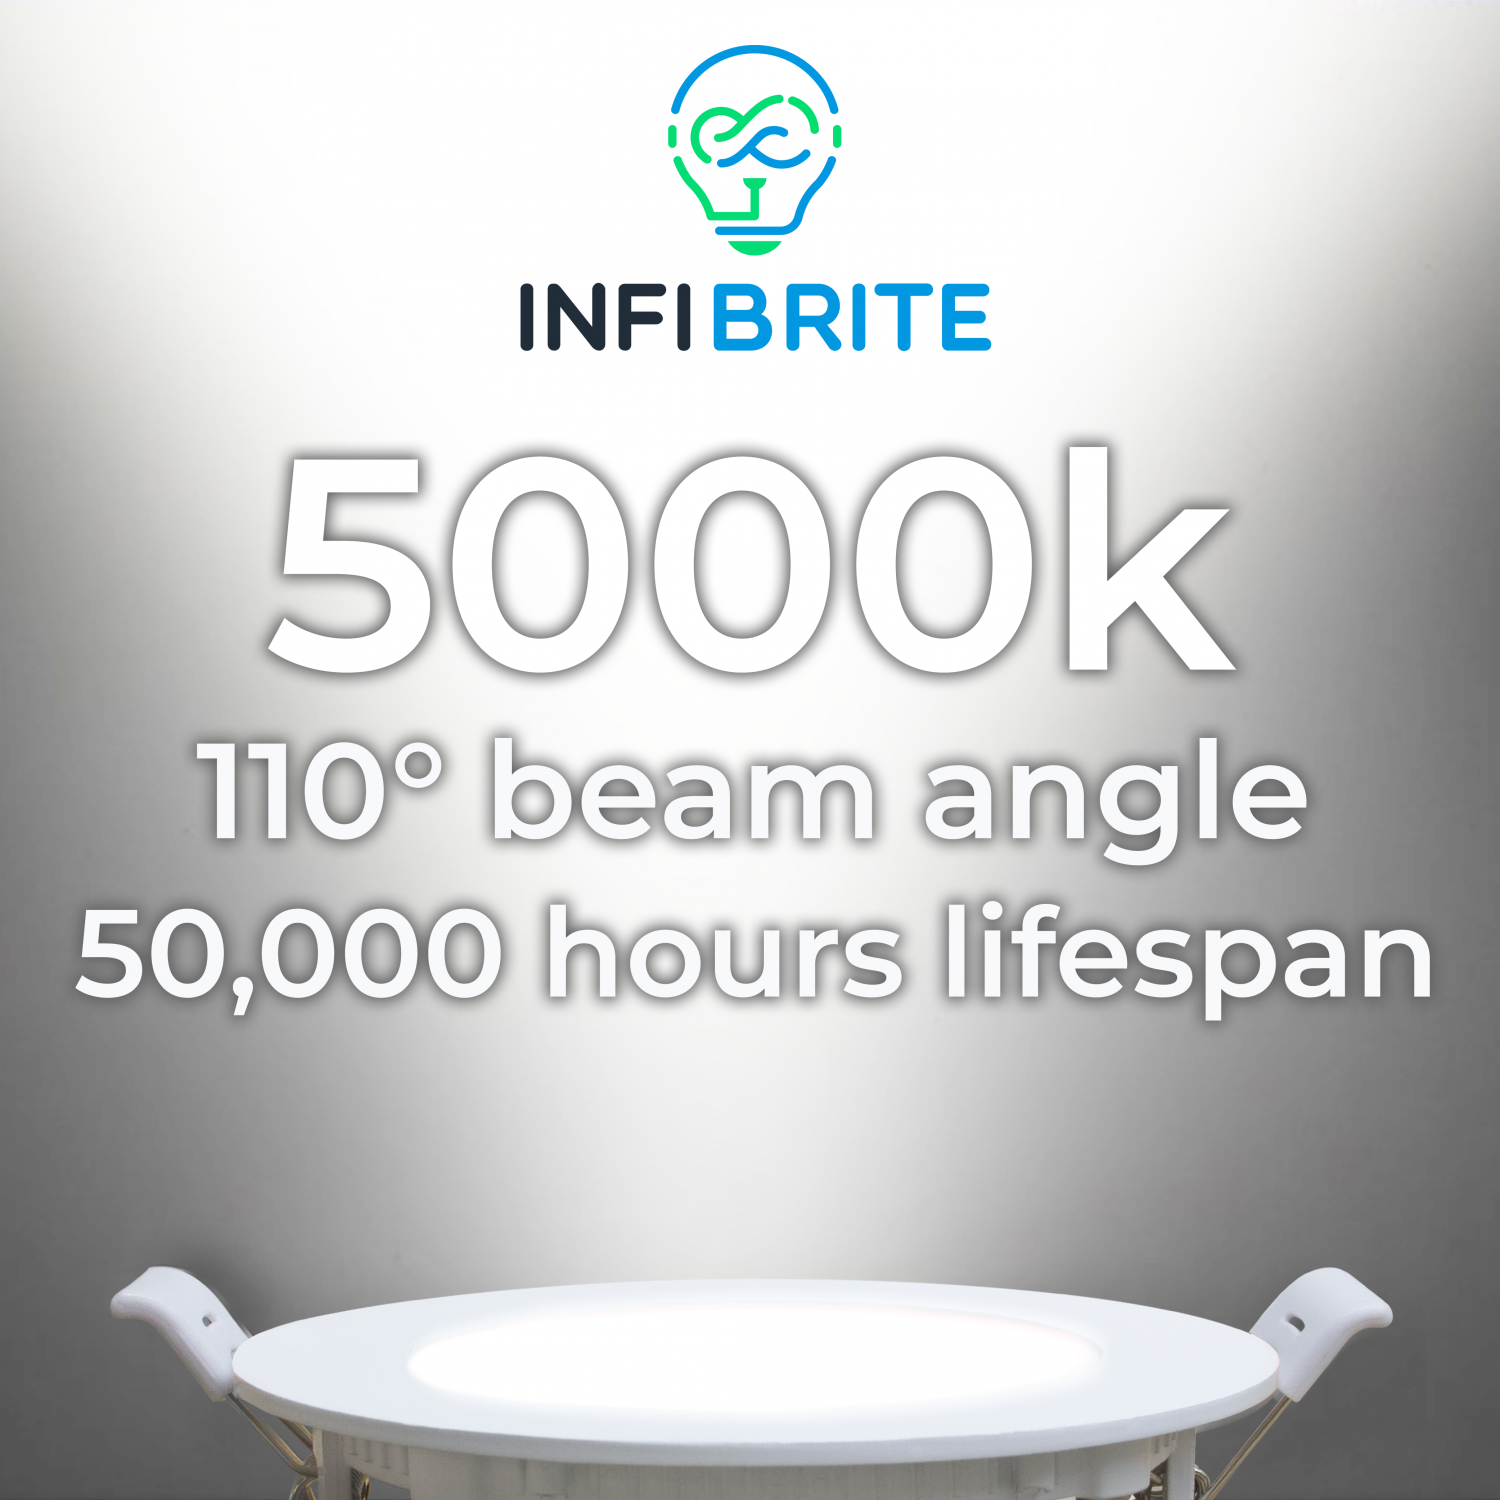 Infibrite 4 Inch 5000K Daylight 9W 750 LM Ultra-Slim LED Ceiling Light with Junction Box, Flush Mount, Dimmable, Fixture for Bedroom, Wet Rated for Bathroom, Easy Install, 75W Eqv, ETL & Energy Star, US Company (24 Pack)